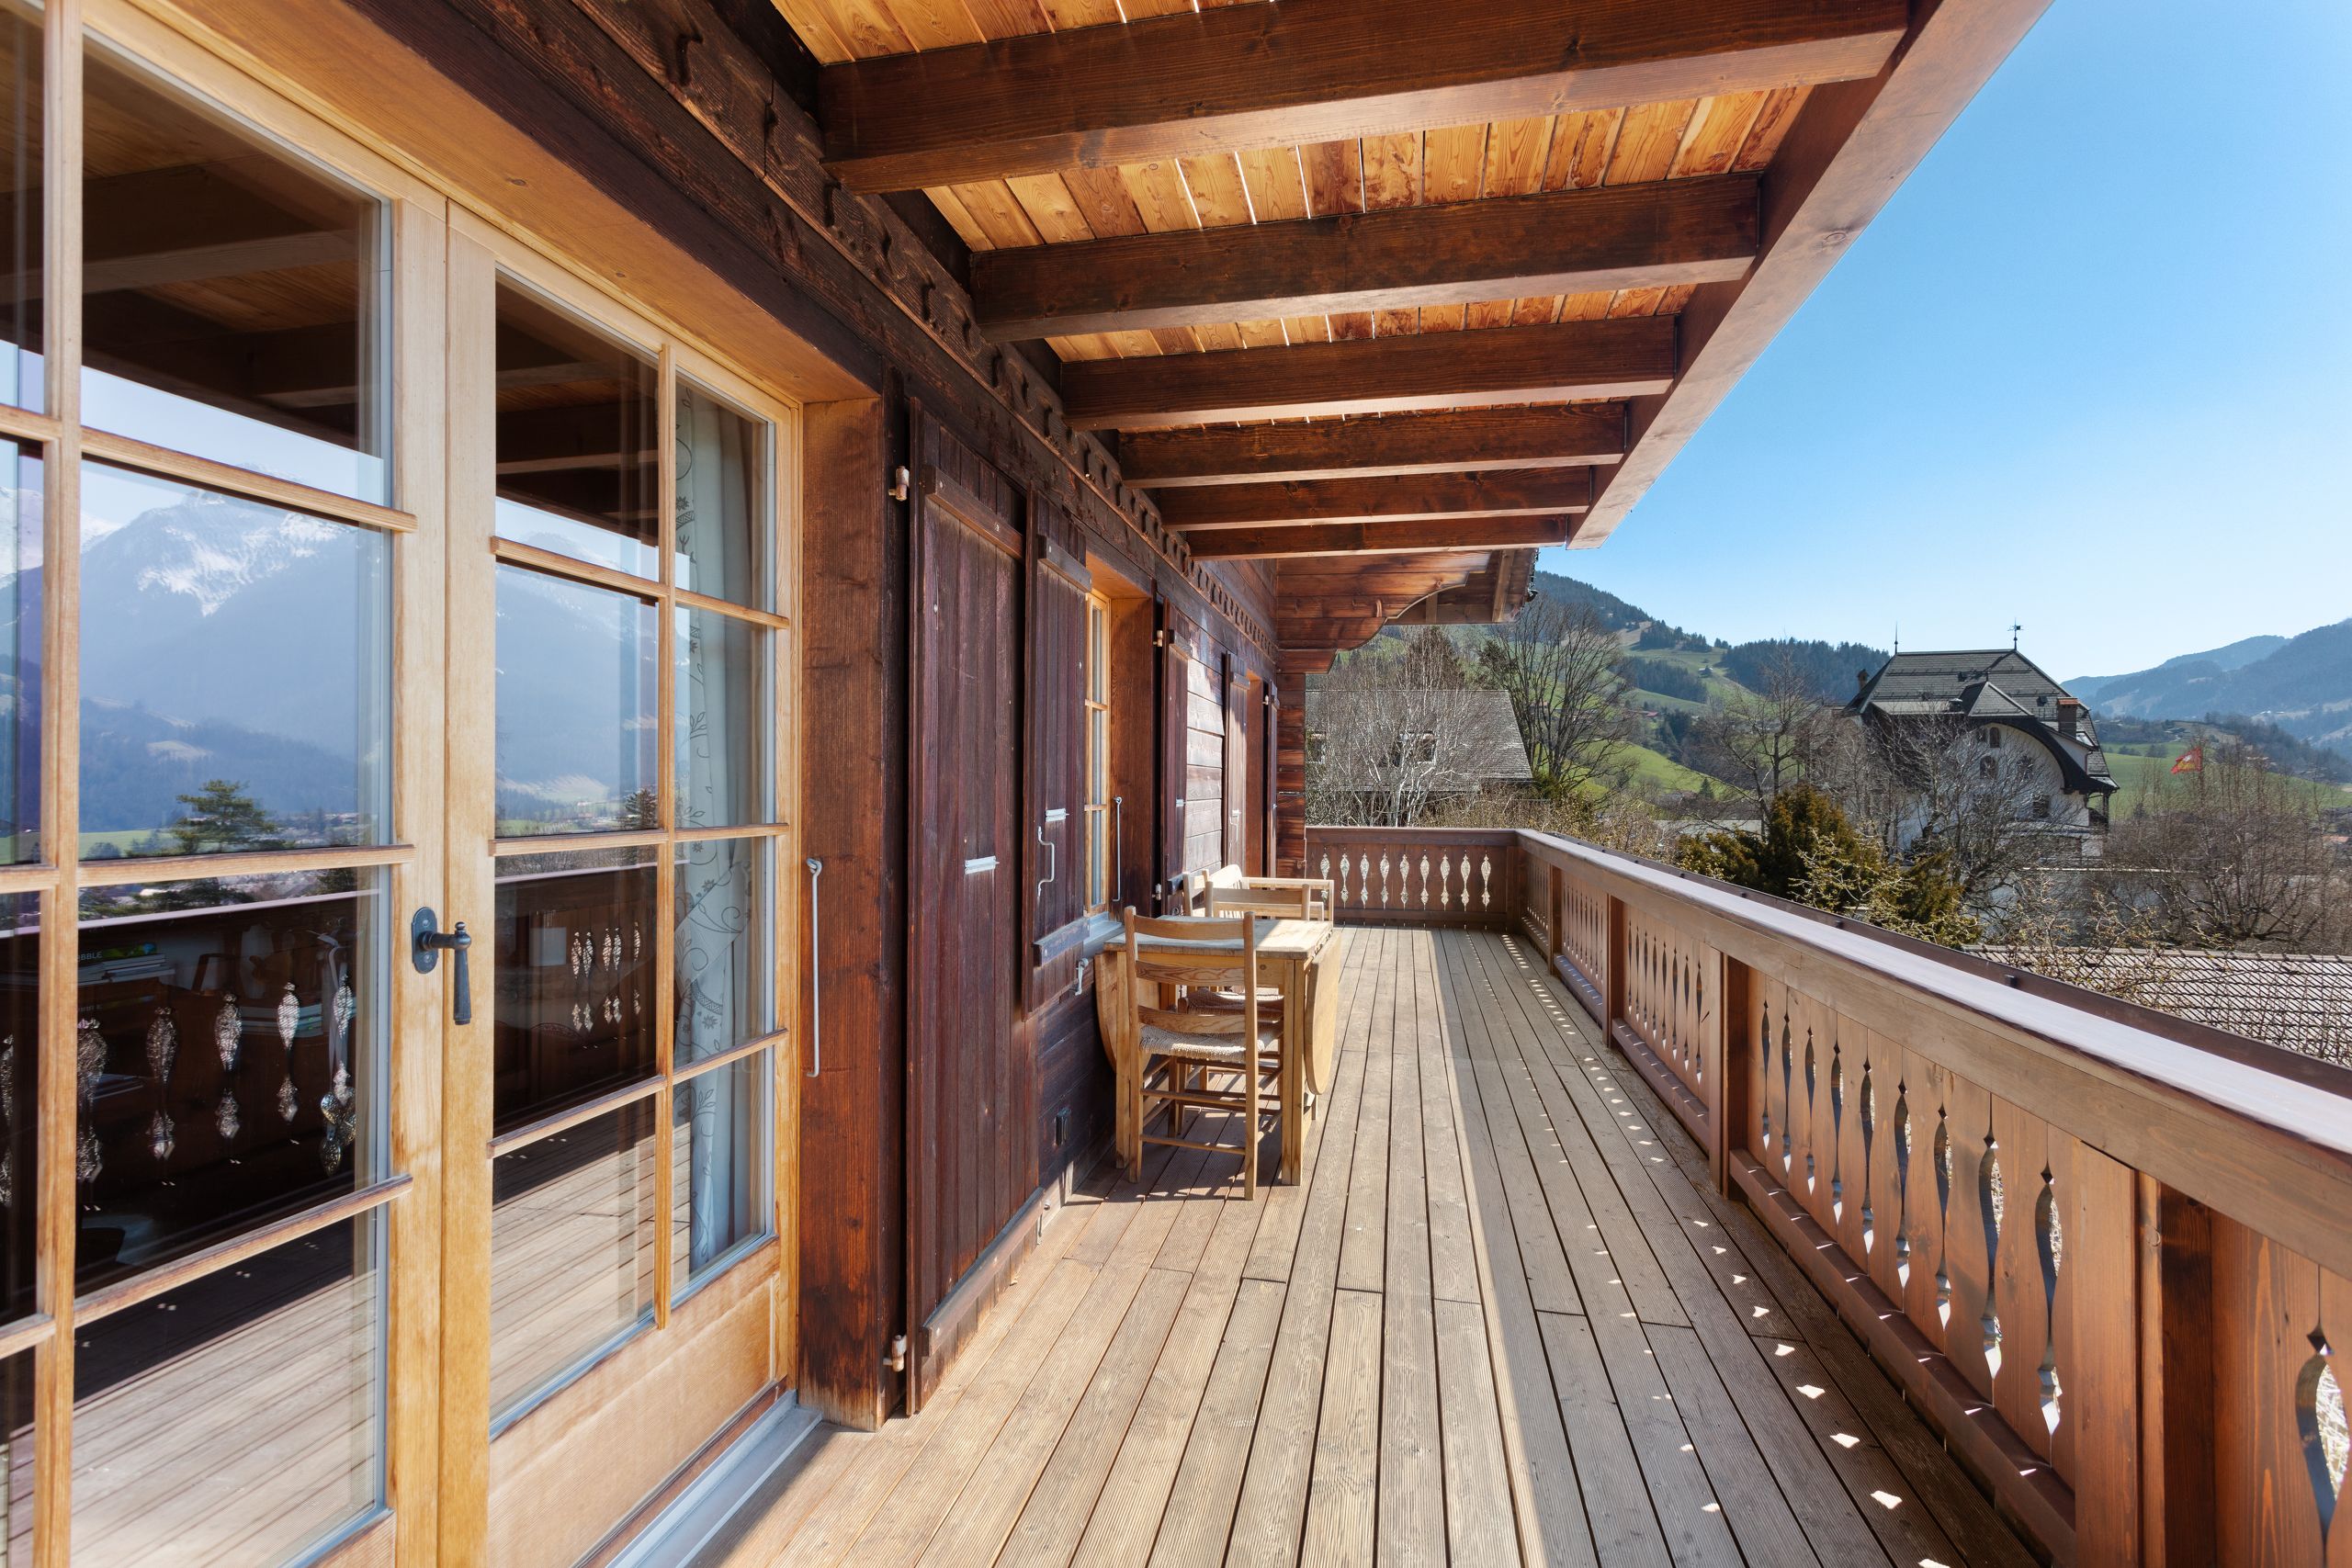 Balcony with unobstructed view of the mountains